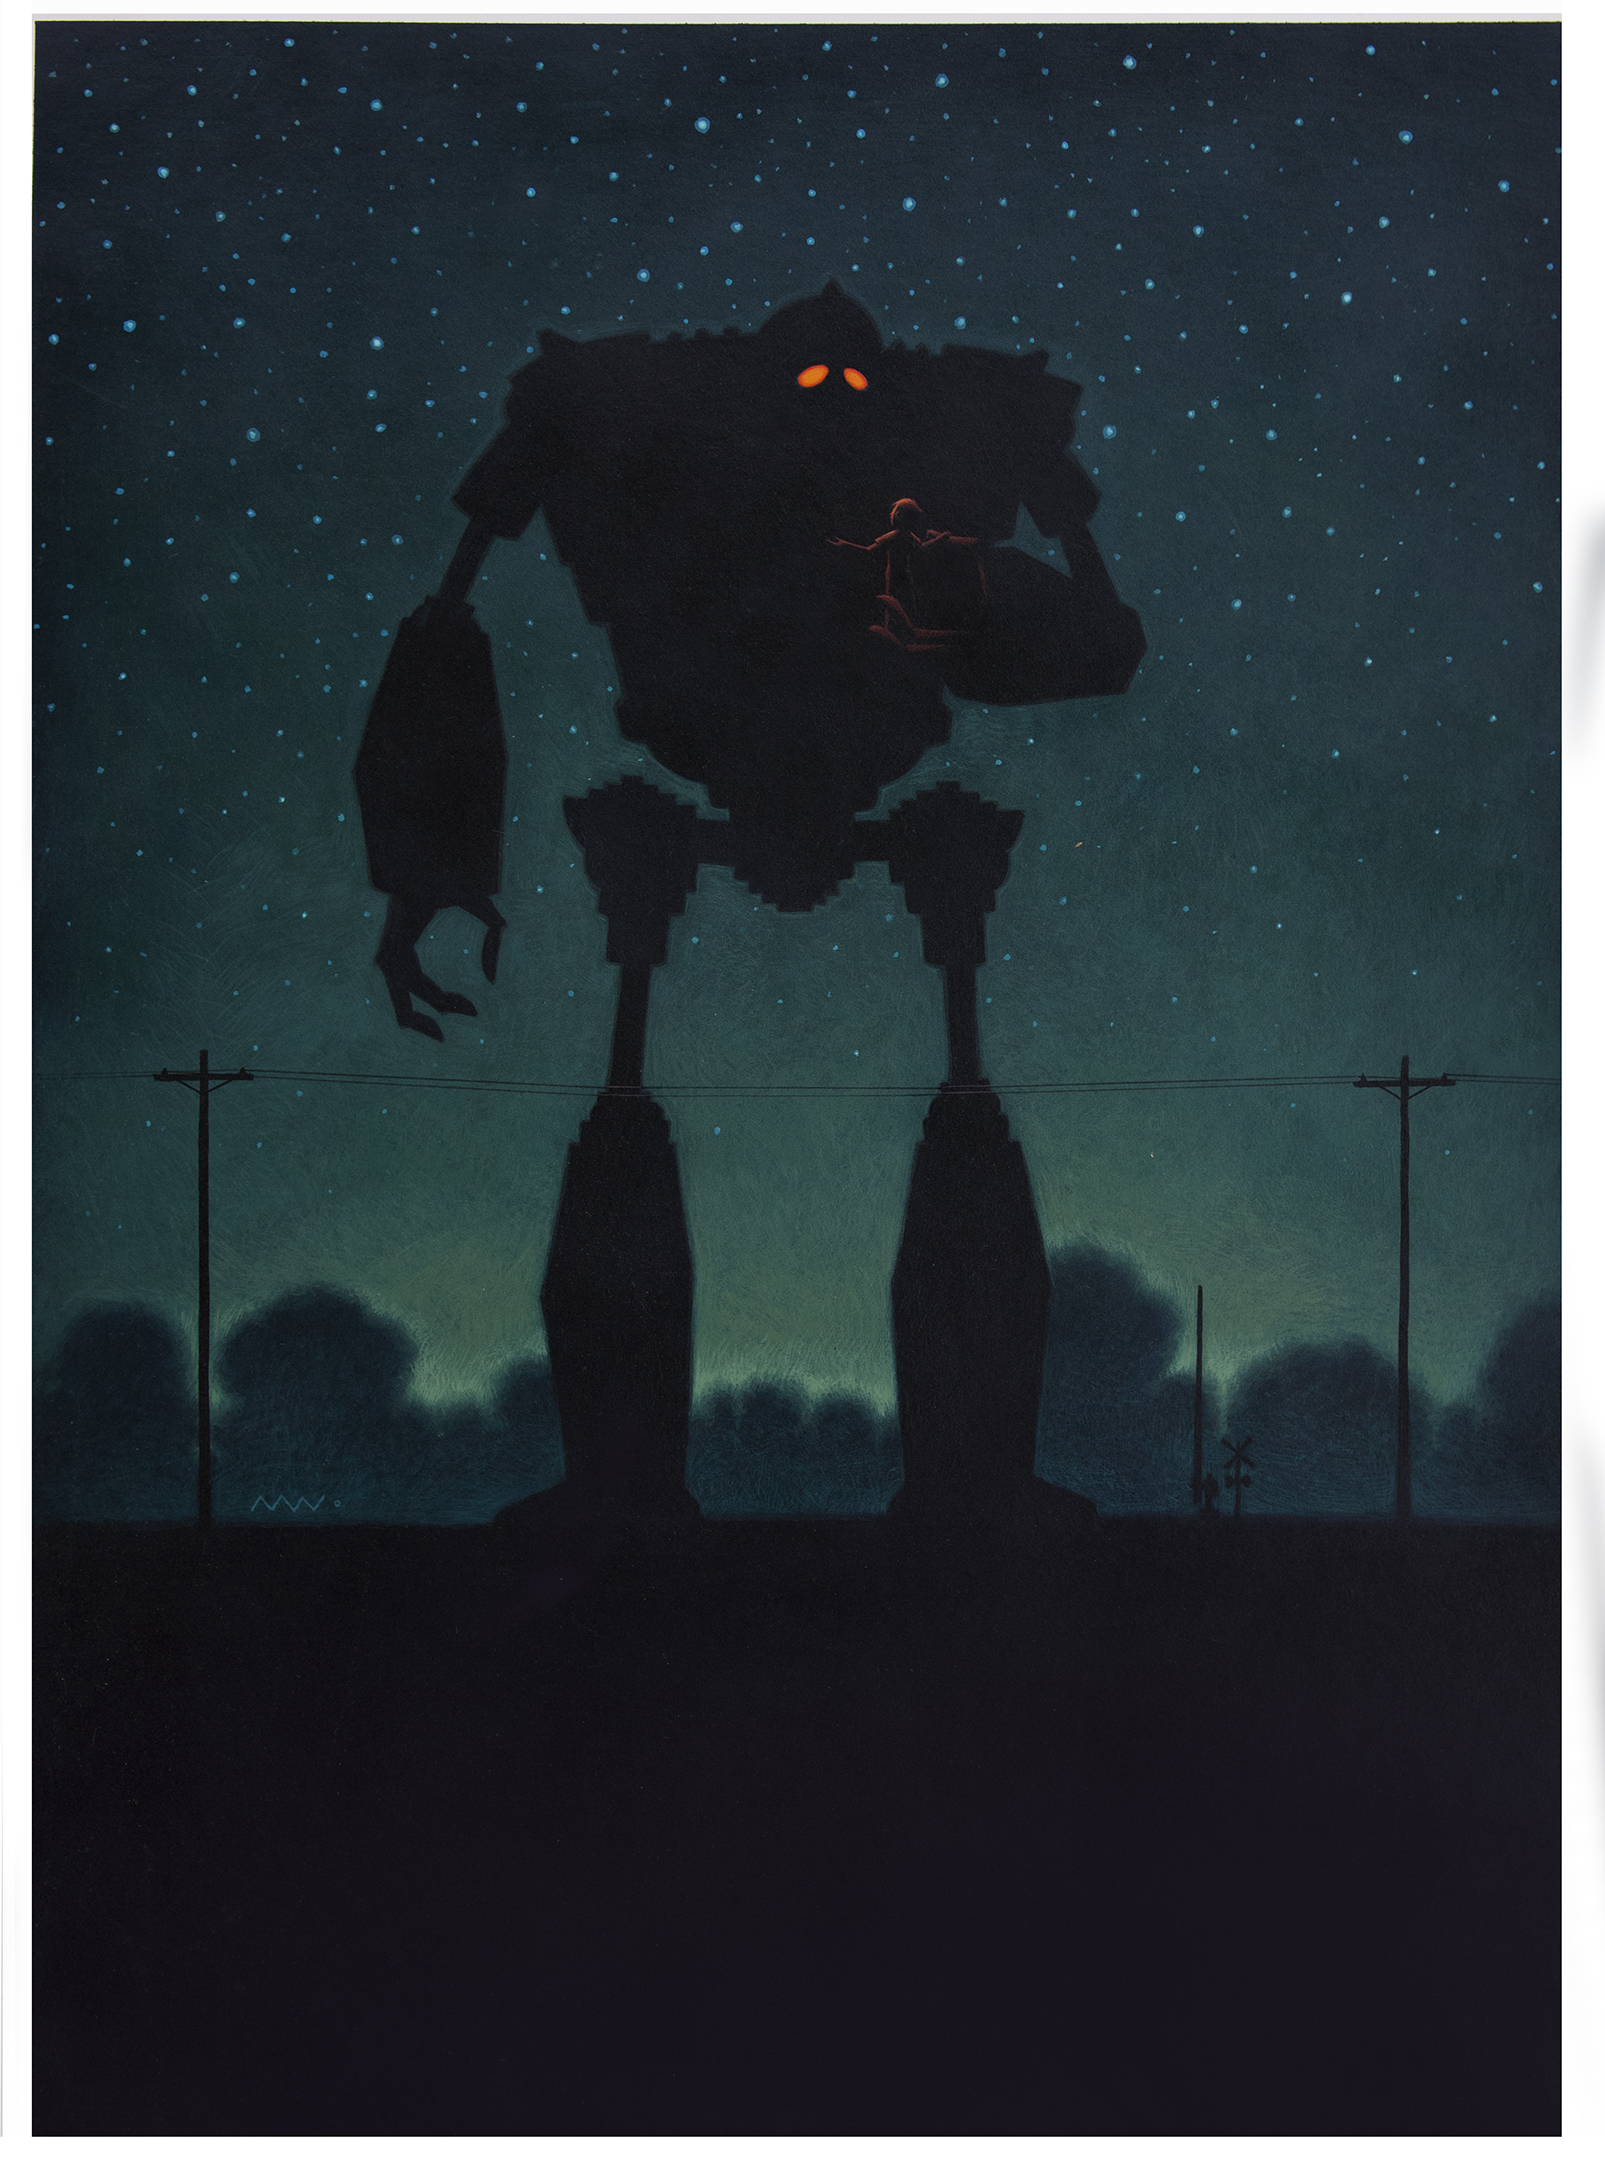 THE IRON GIANT — WHITING PICTURES